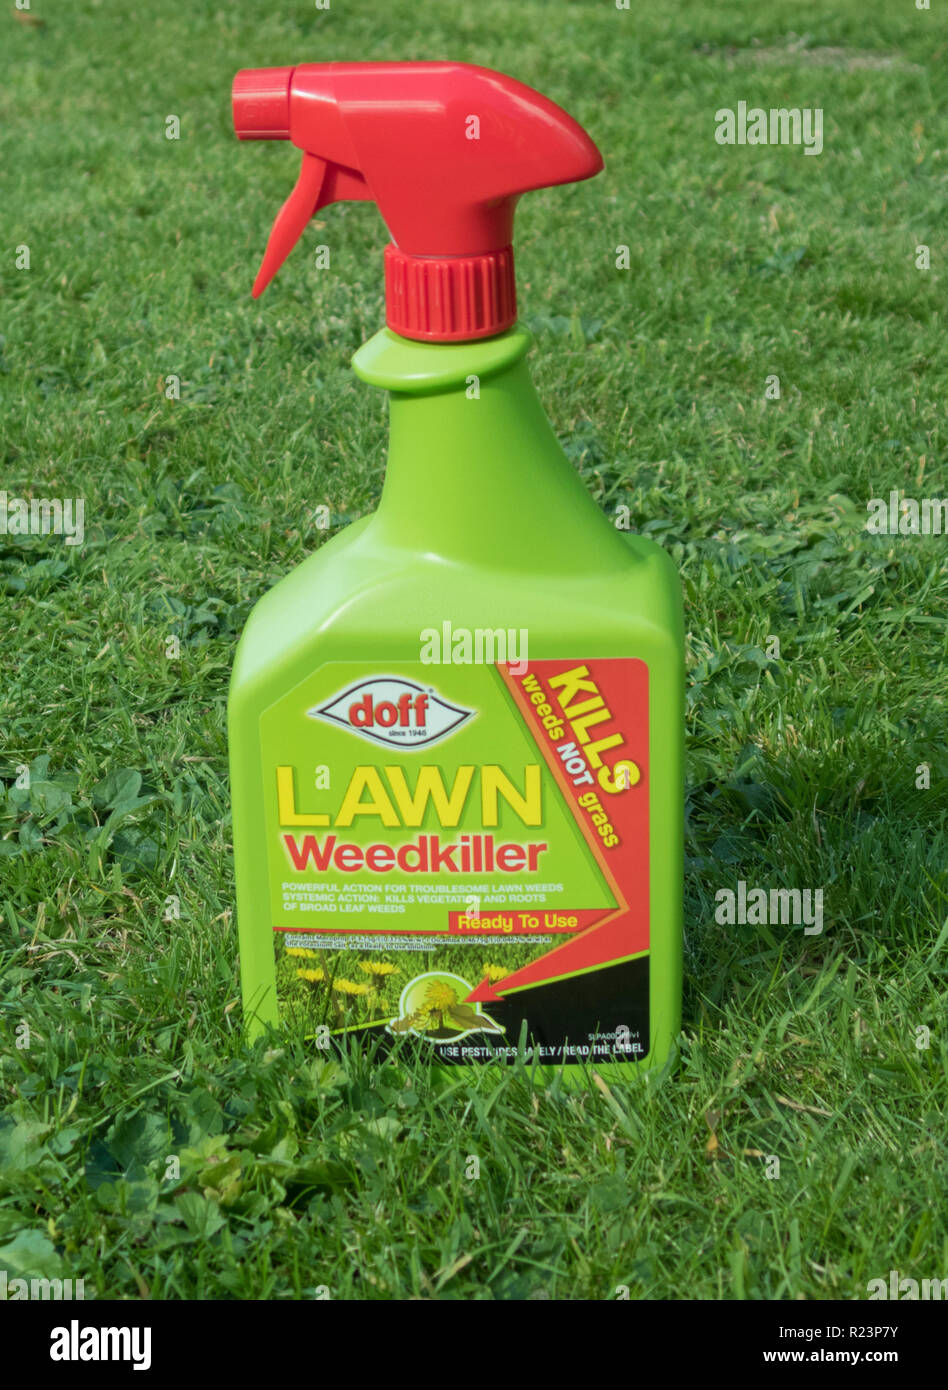 spray bottle of doff brand lawn weedkiller for killing weeds in lawns uk R23P7Y